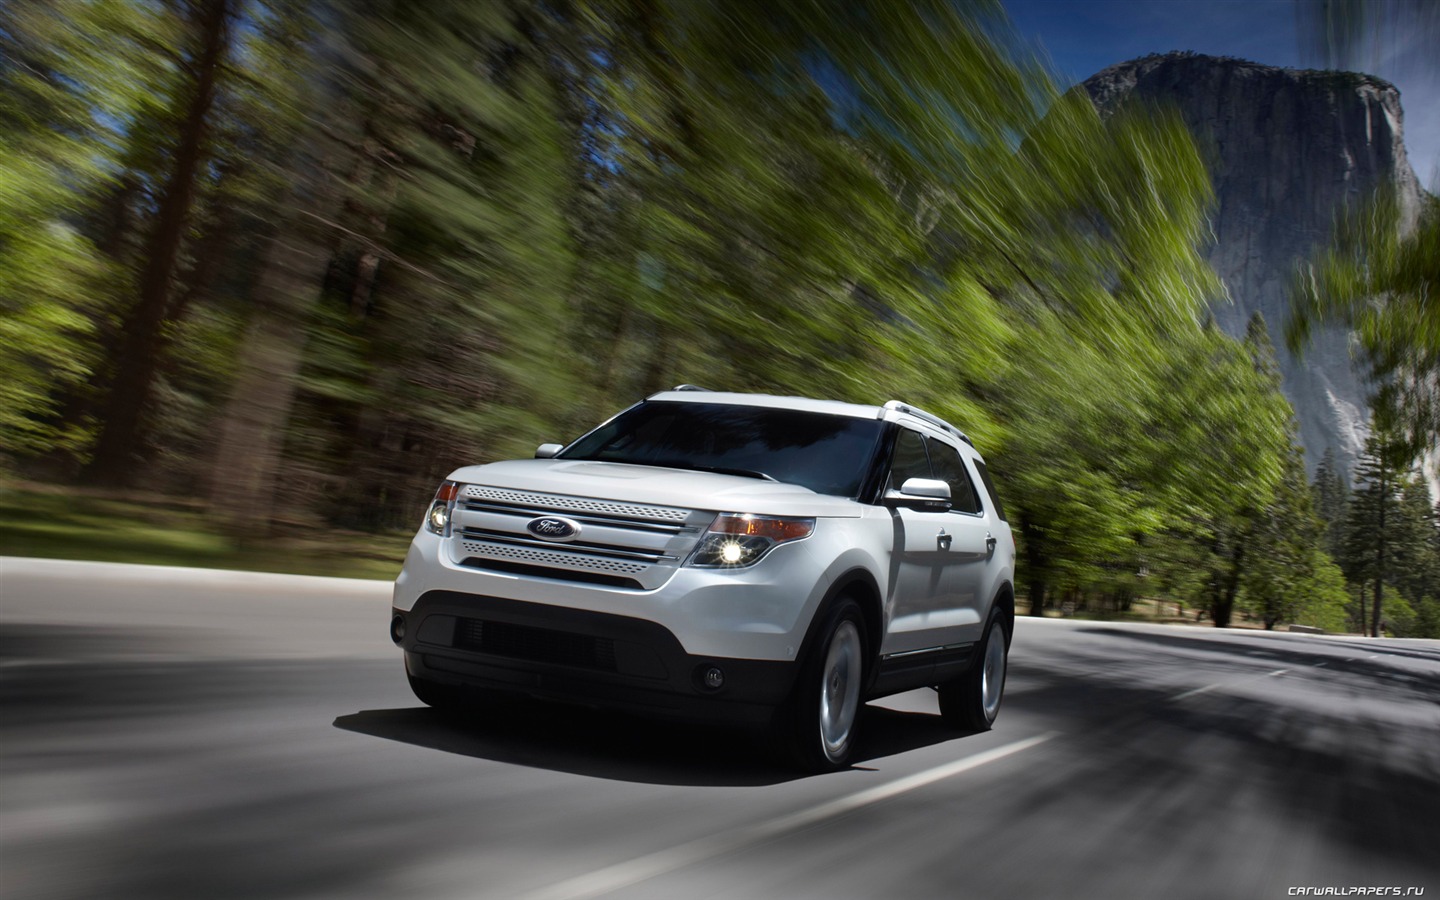 Ford Explorer Limited - 2011 福特17 - 1440x900